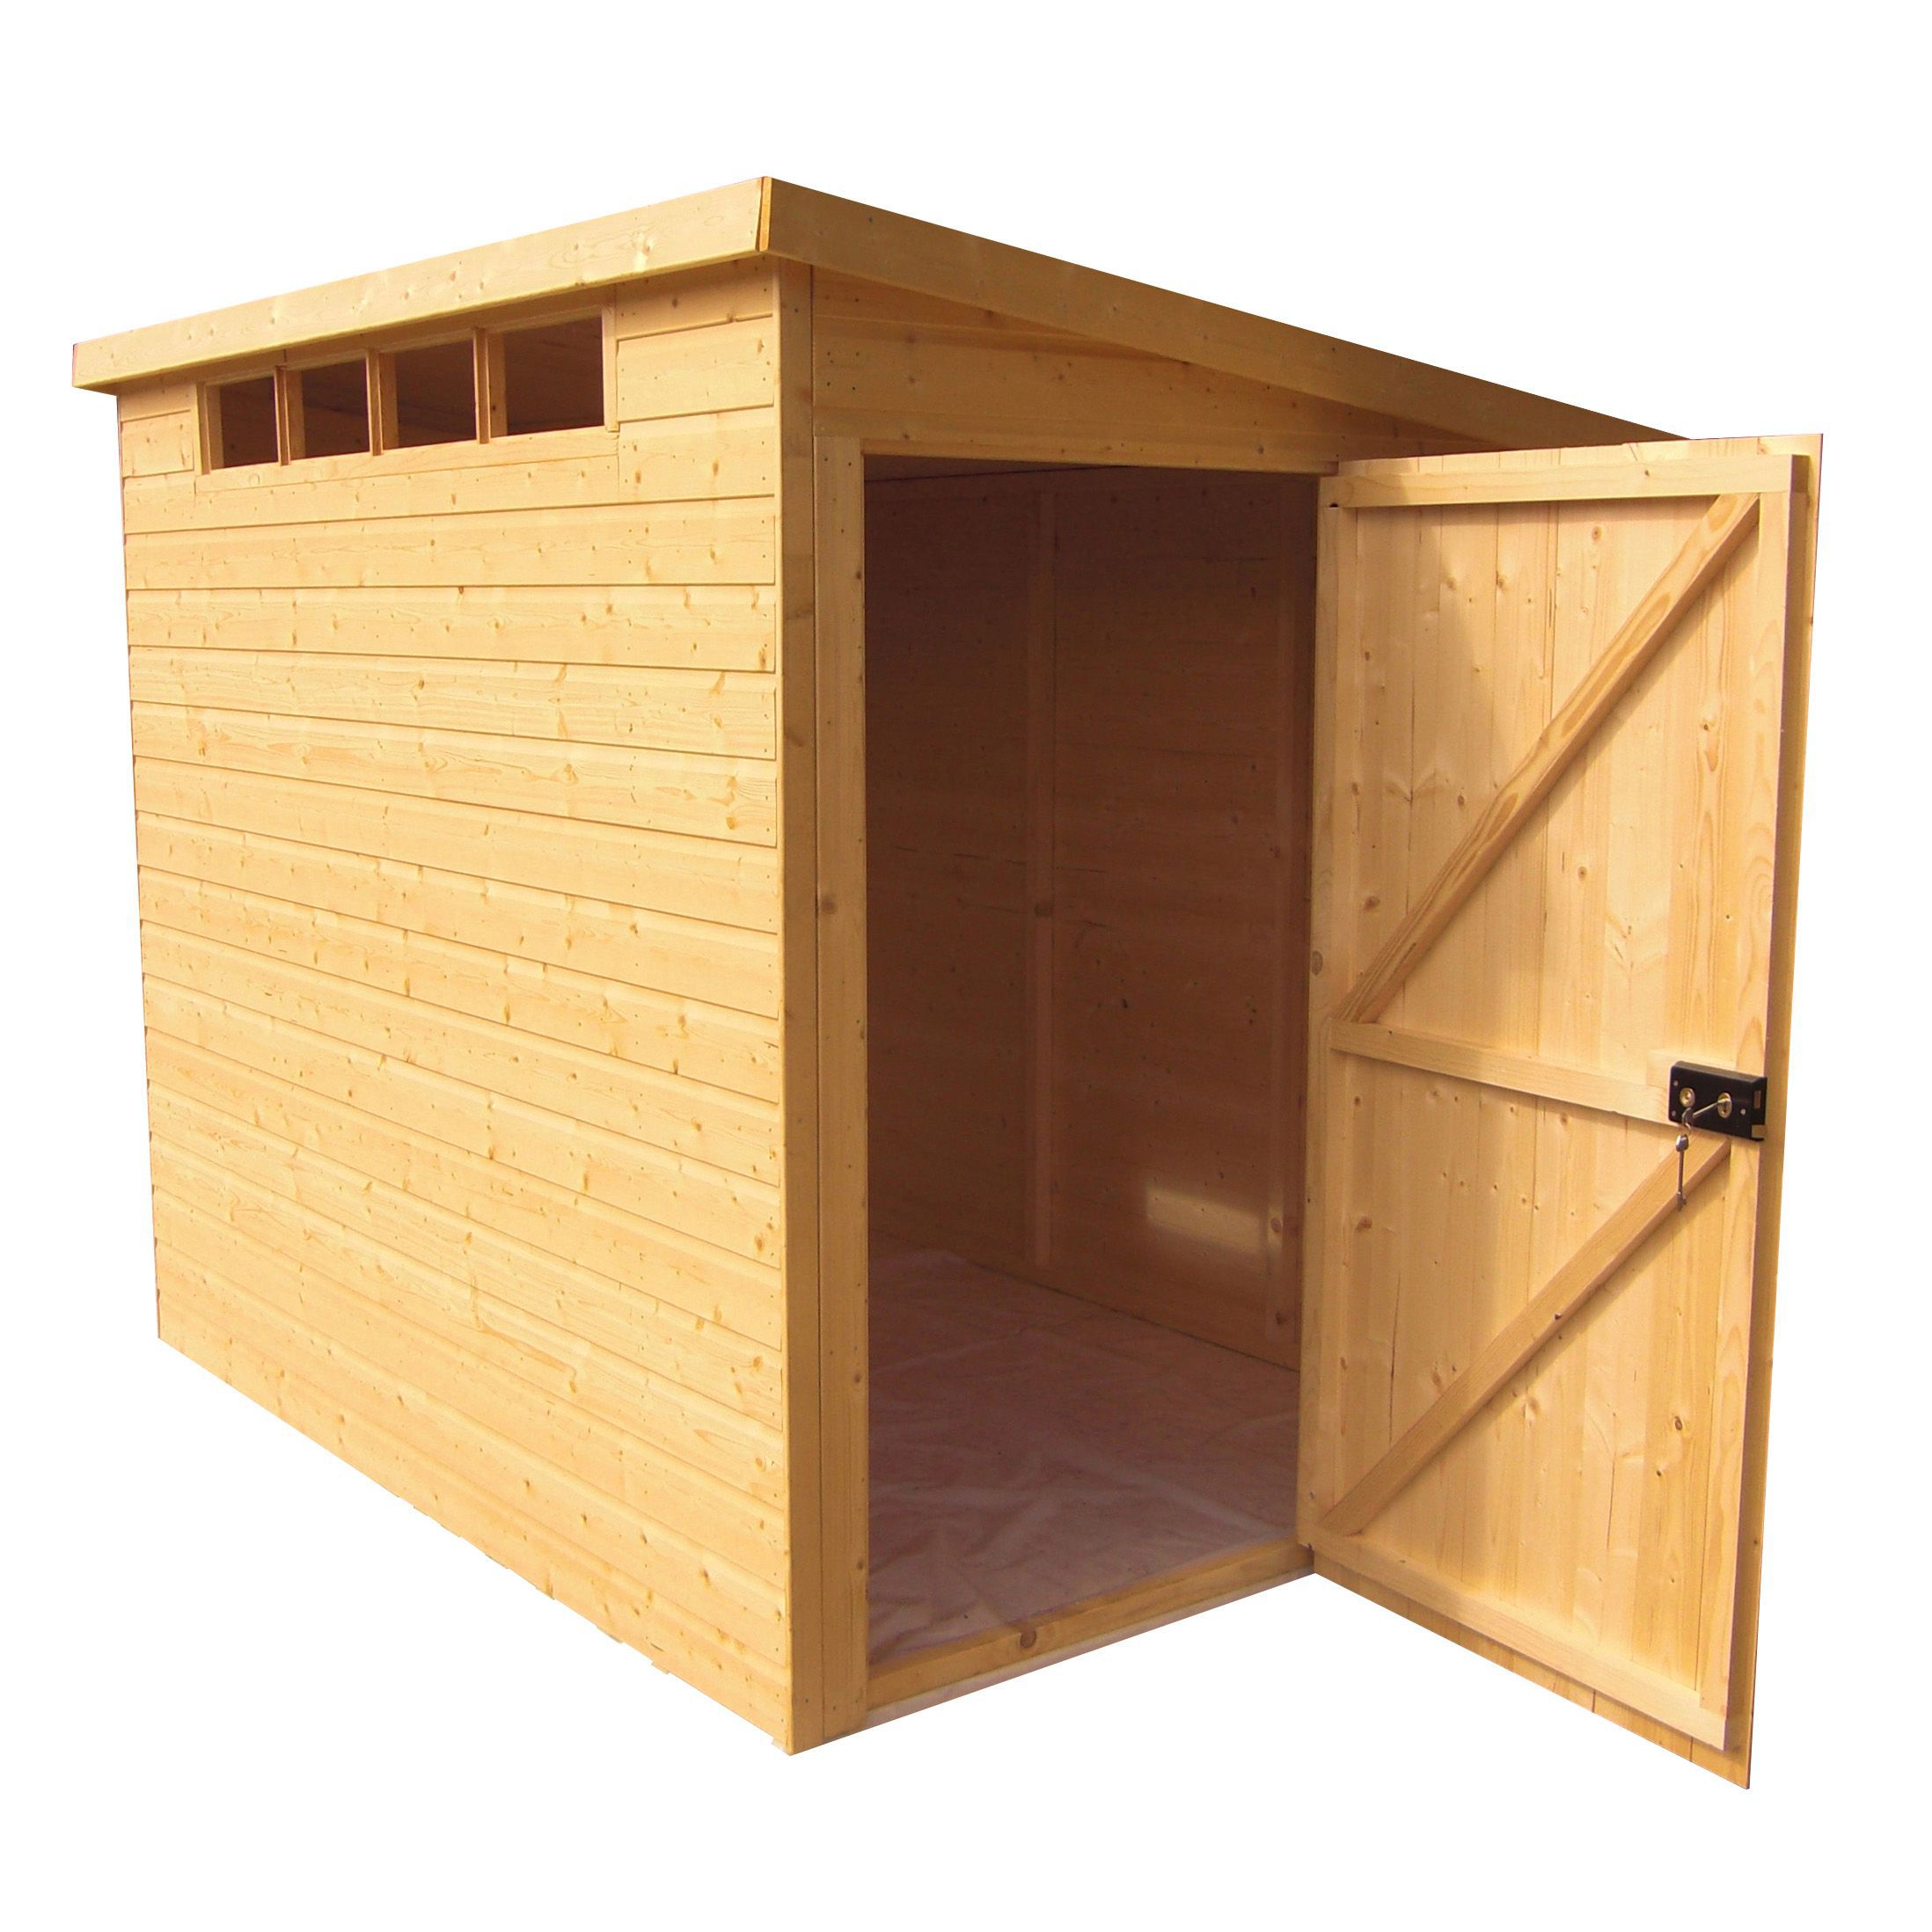 Shire 10x6 Pent Shed - Base not includedAssembly service included